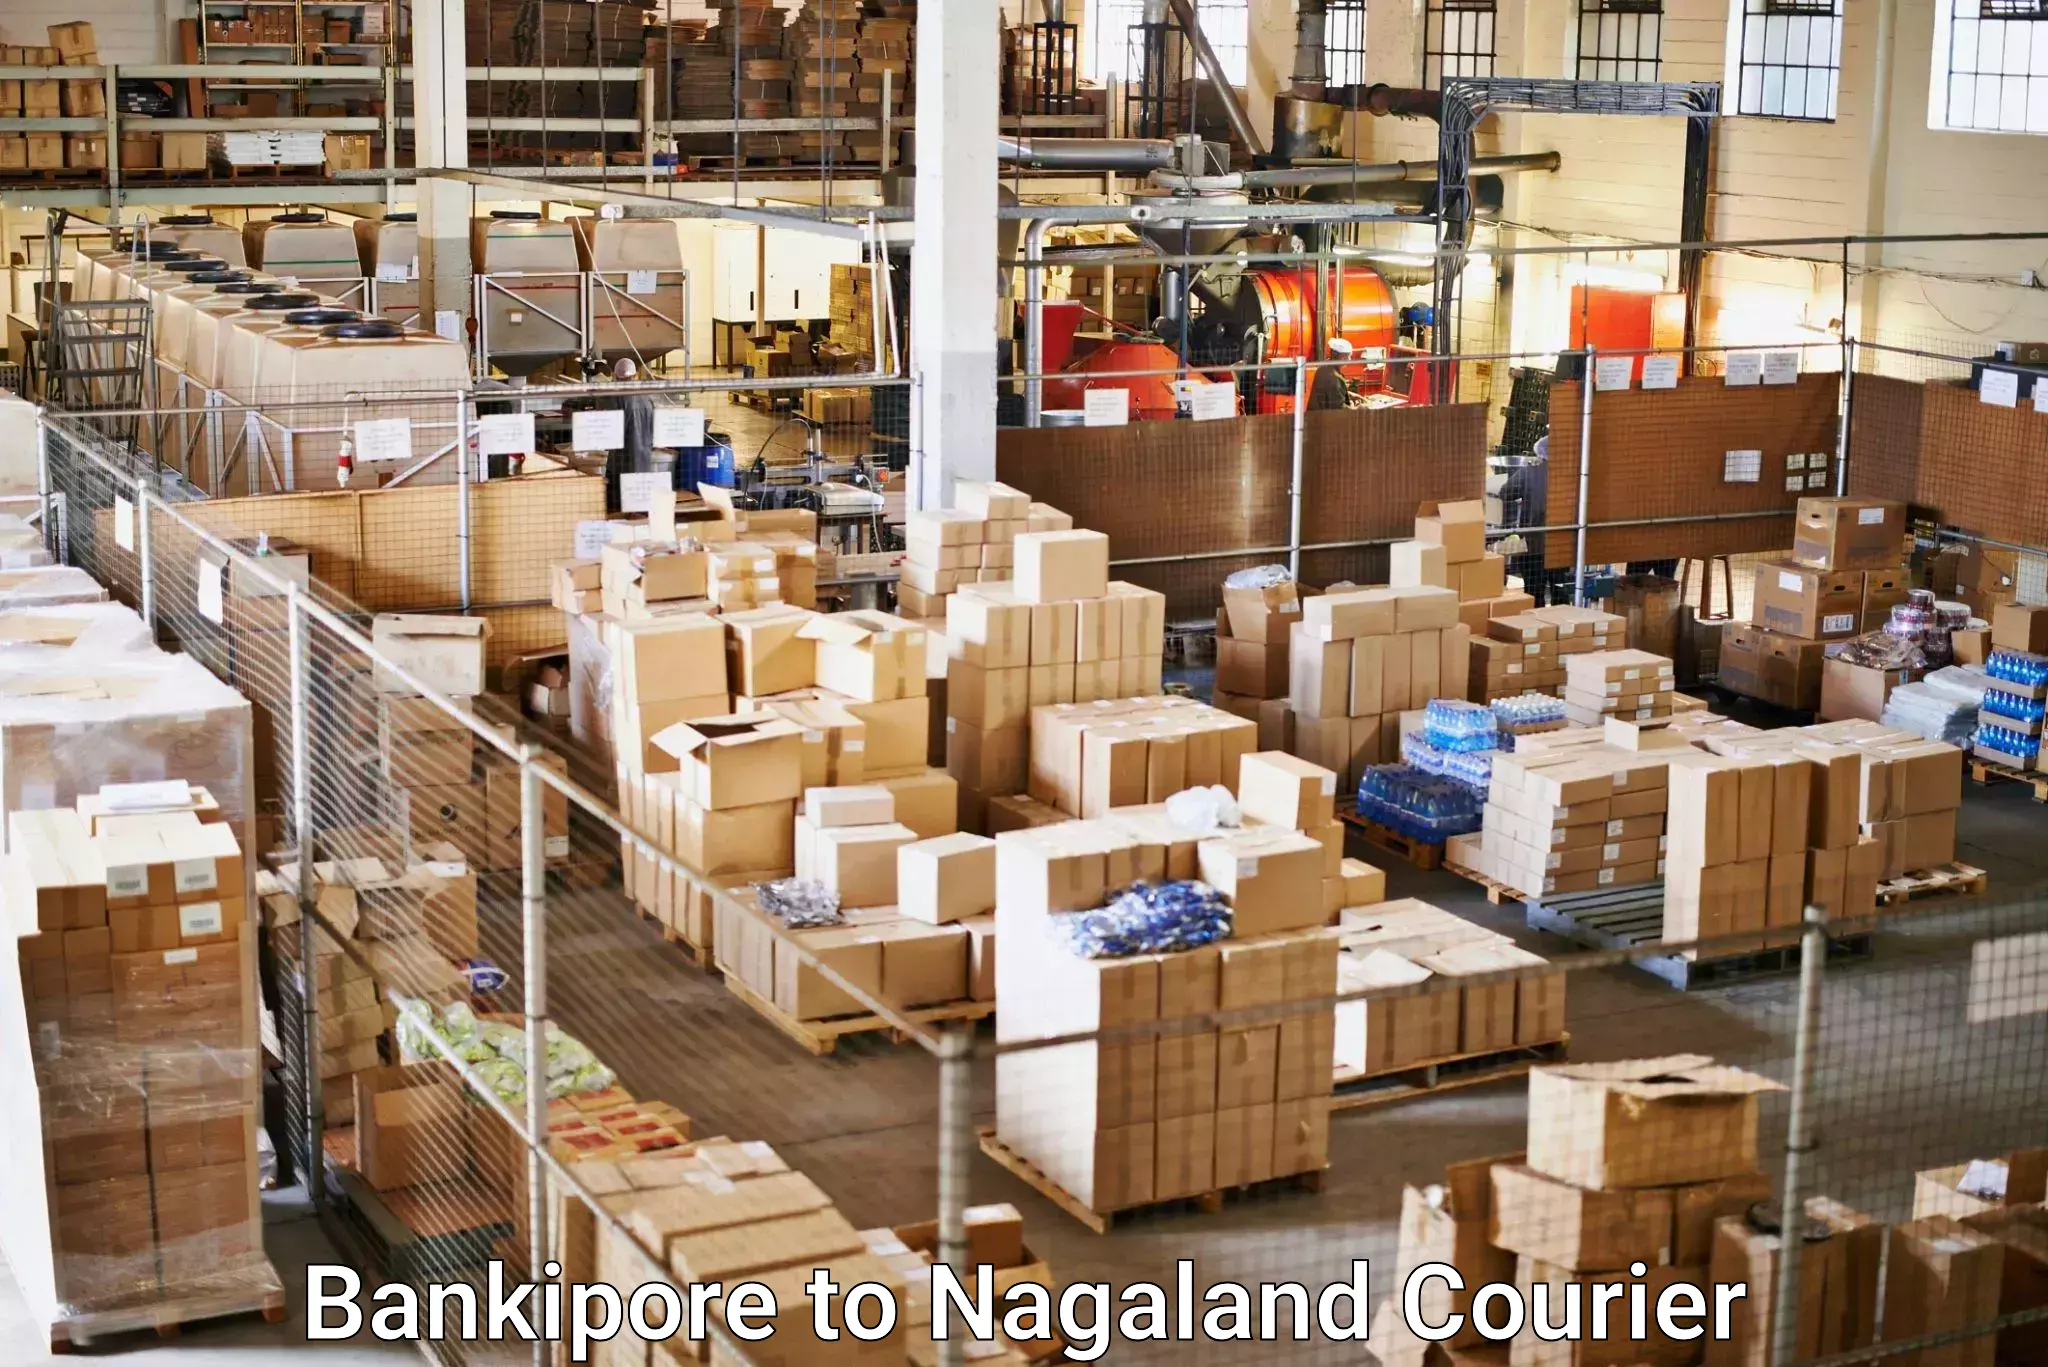 Round-the-clock parcel delivery Bankipore to Nagaland